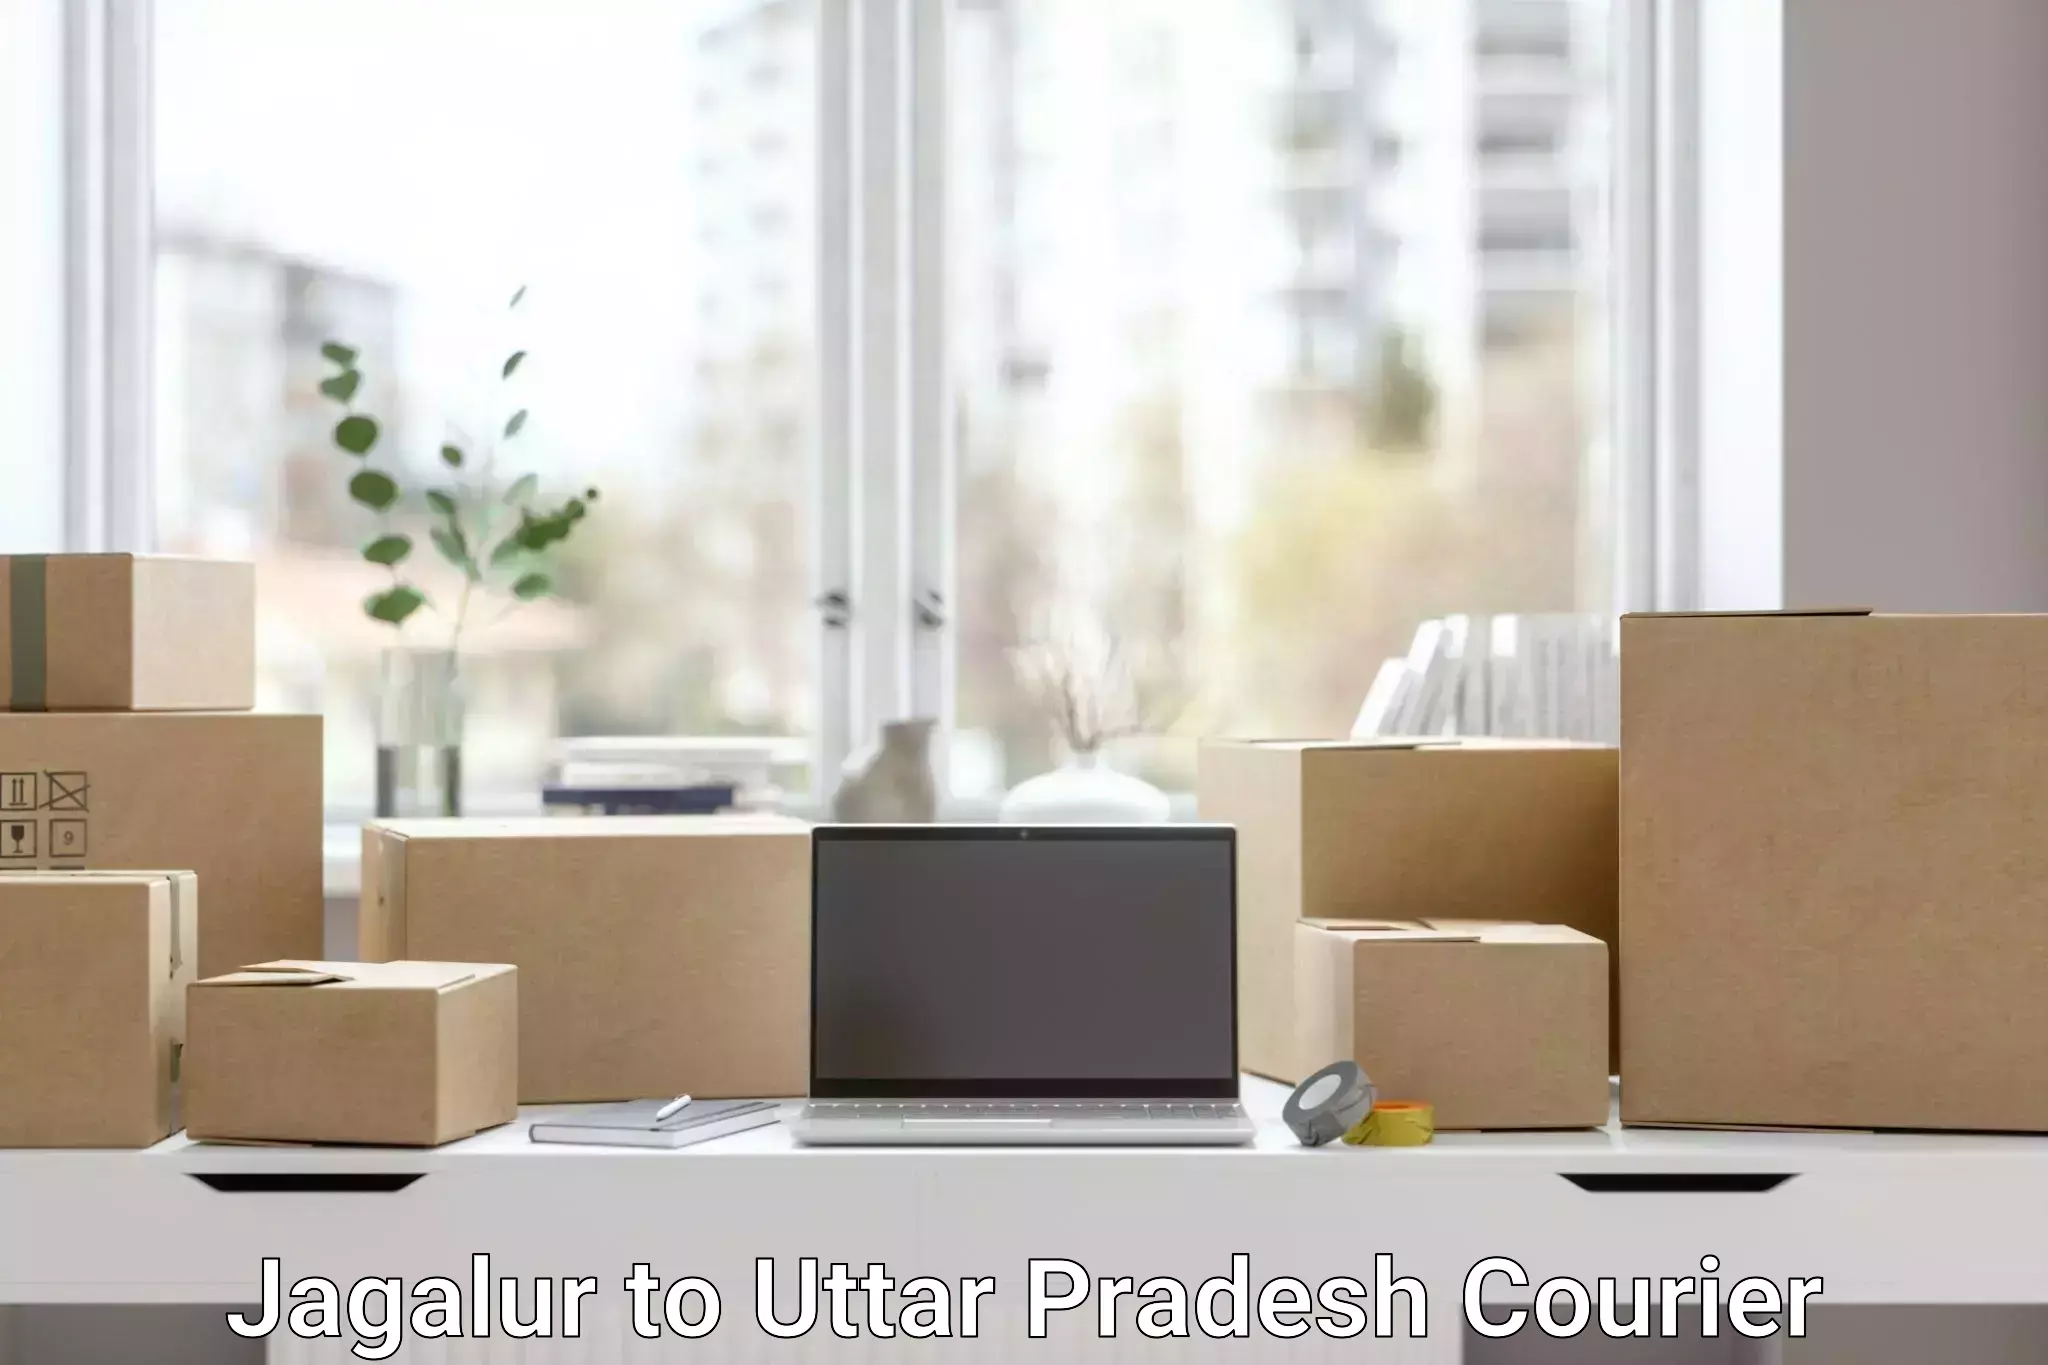 Online shipping calculator in Jagalur to Allahabad